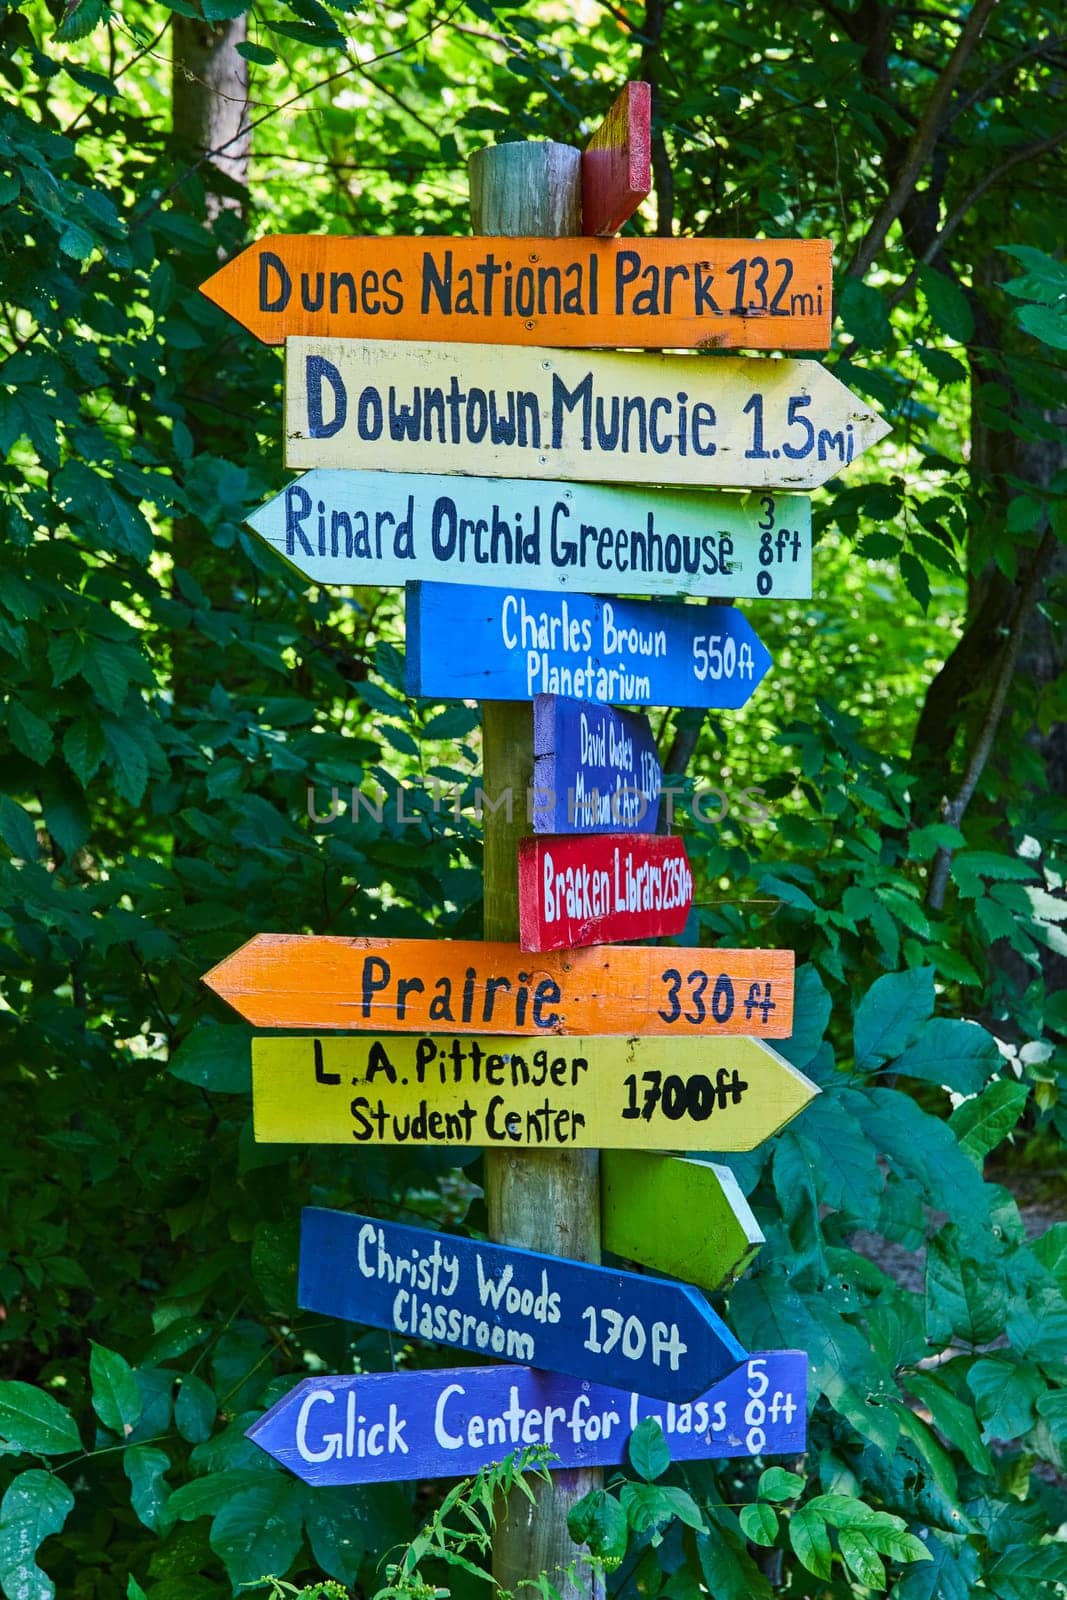 Vibrant hand-painted directional signpost in lush Indiana garden, guiding towards educational and natural attractions.